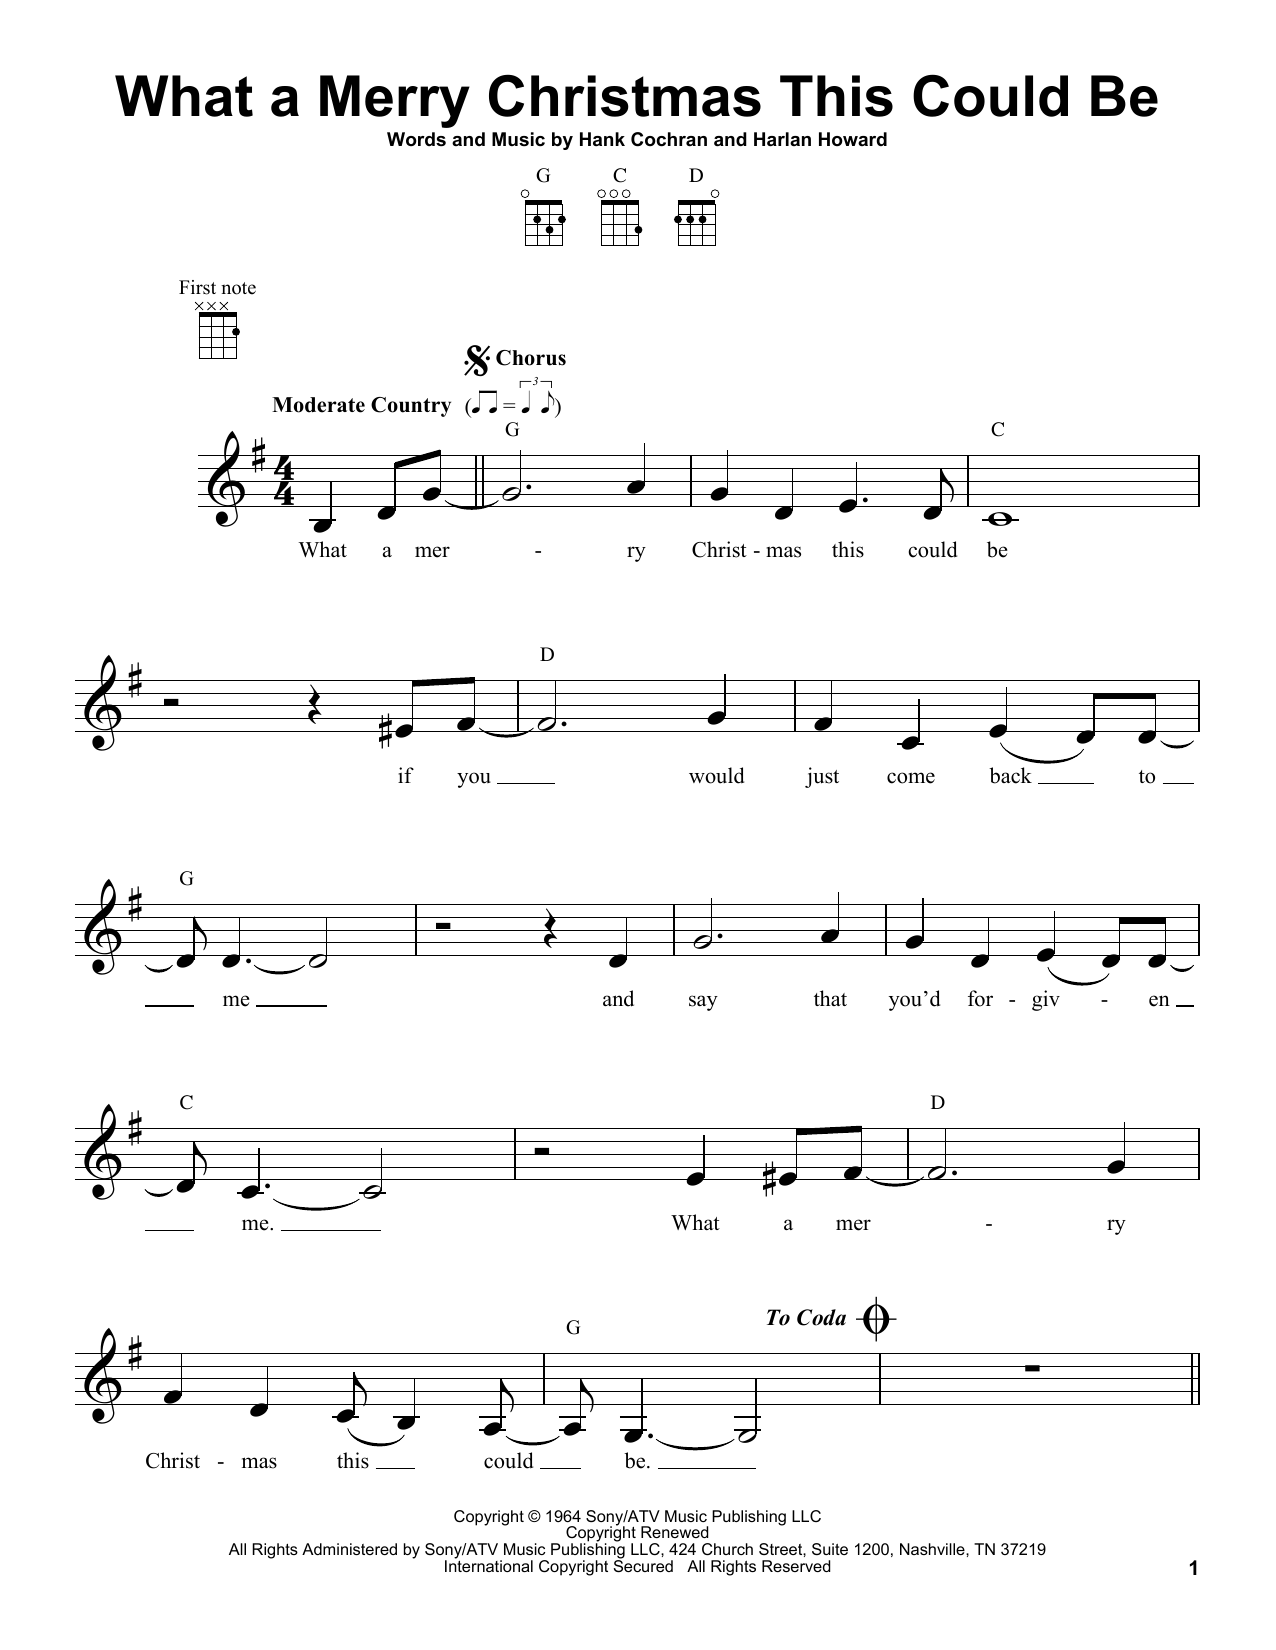 Download George Strait What A Merry Christmas This Could Be Sheet Music